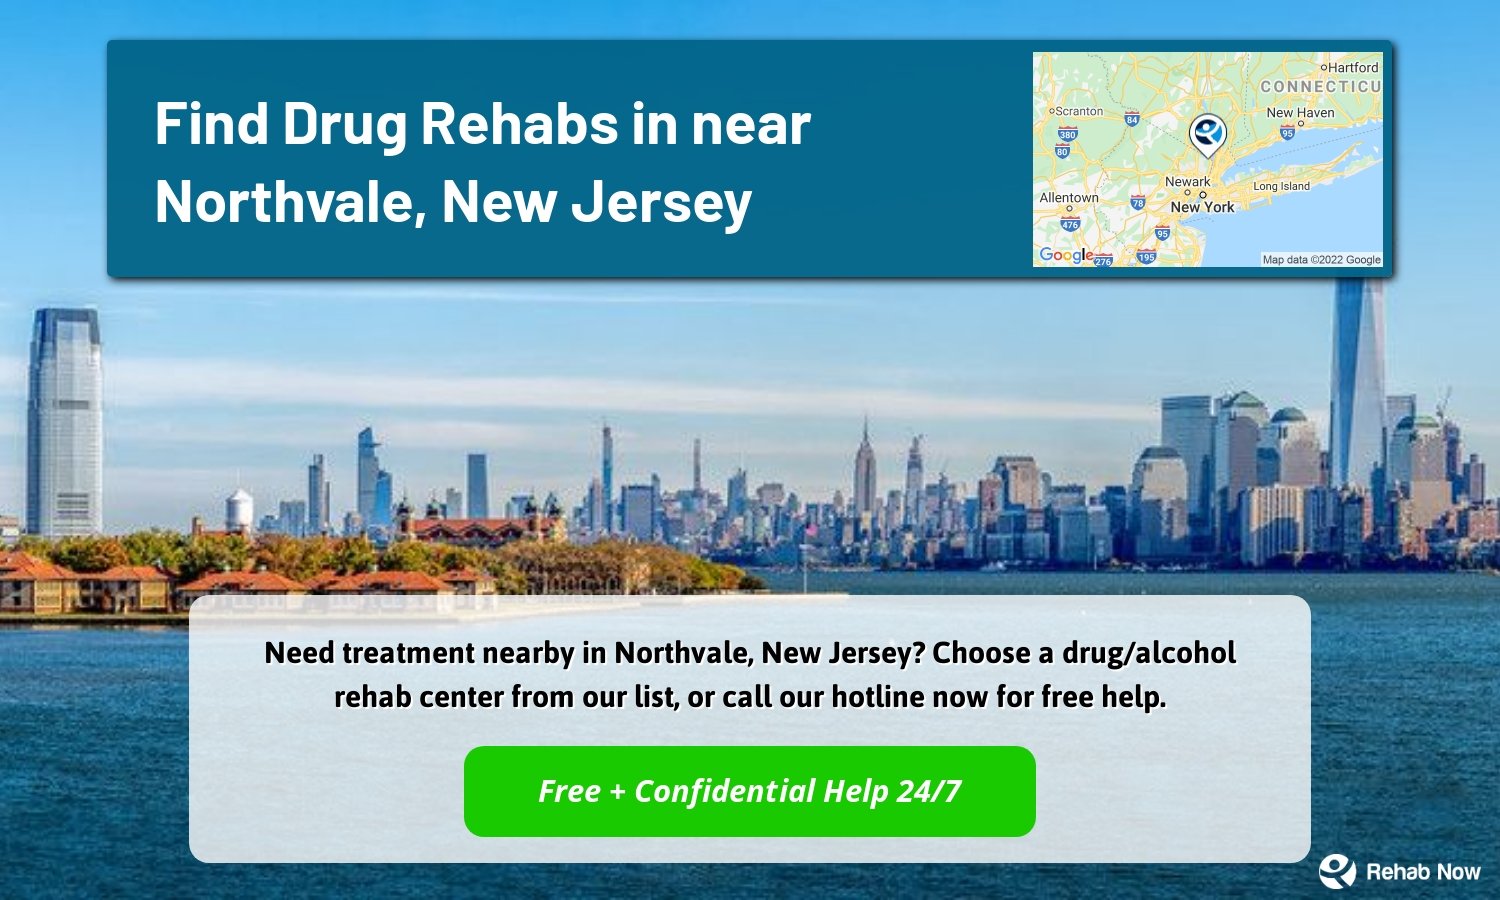 Need treatment nearby in Northvale, New Jersey? Choose a drug/alcohol rehab center from our list, or call our hotline now for free help.